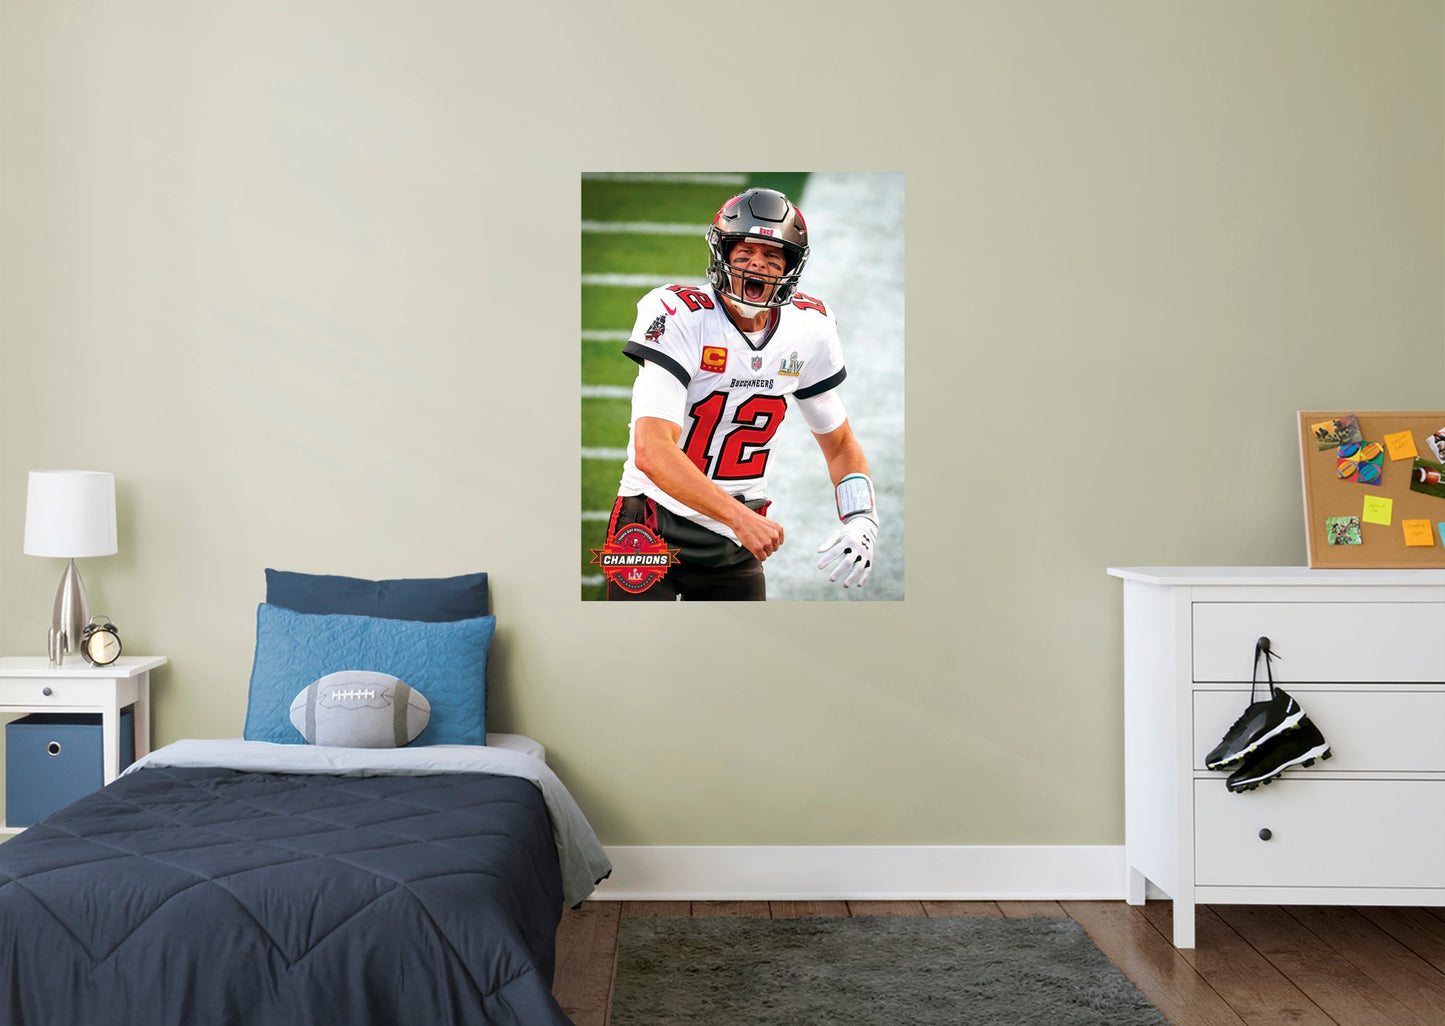 Tampa Bay Buccaneers: Tom Brady Super Bowl Lv Celebration Mural        - Officially Licensed NFL Removable Wall   Adhesive Decal